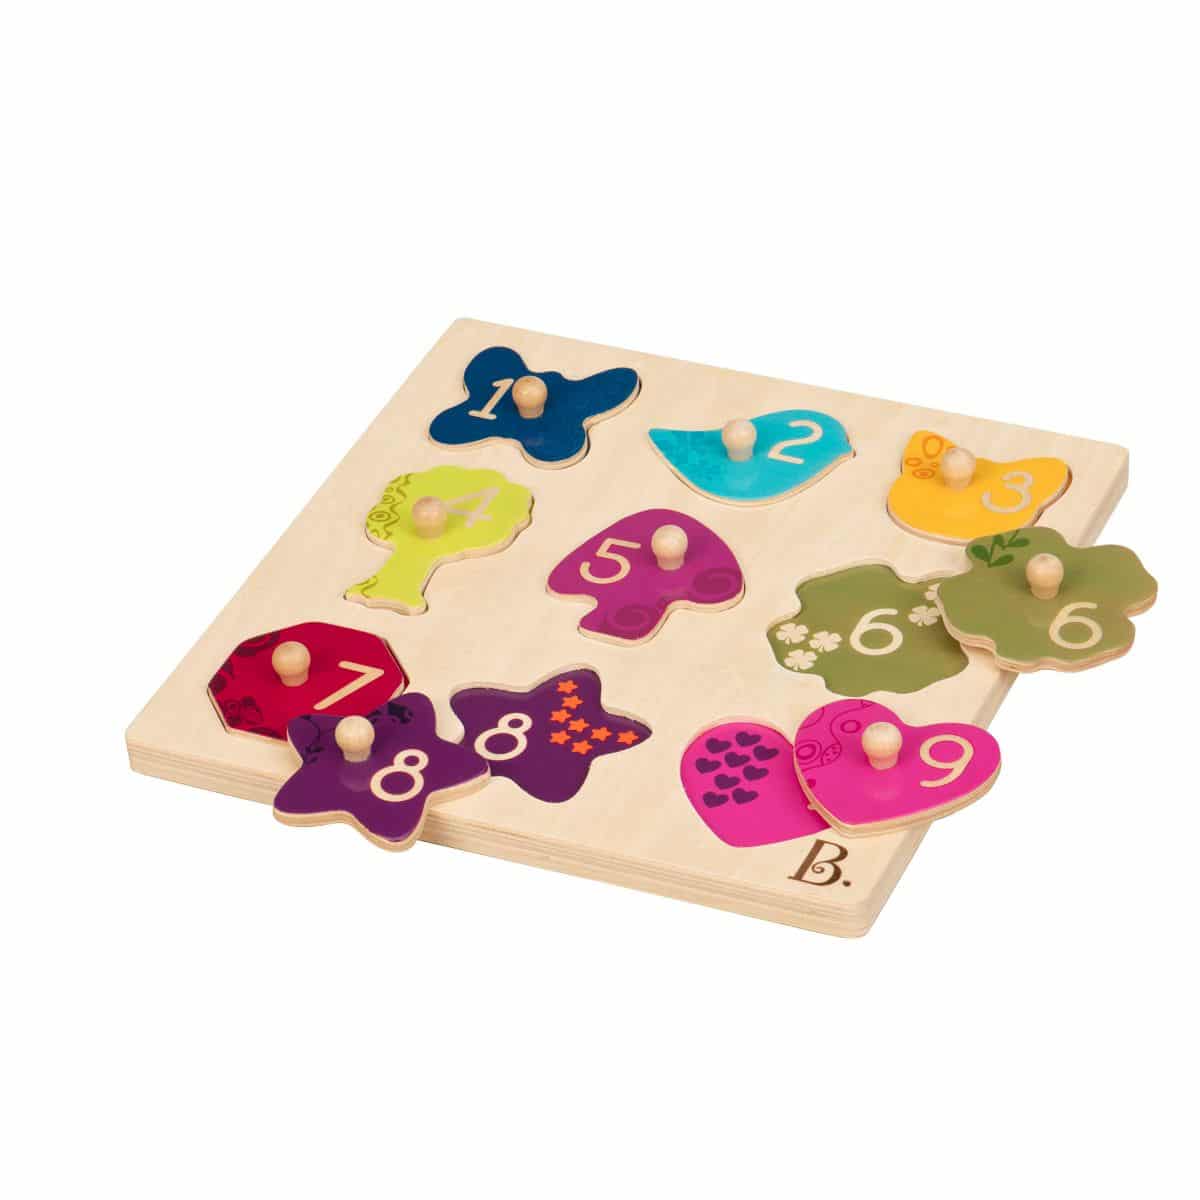 Number-themed wooden peg puzzle